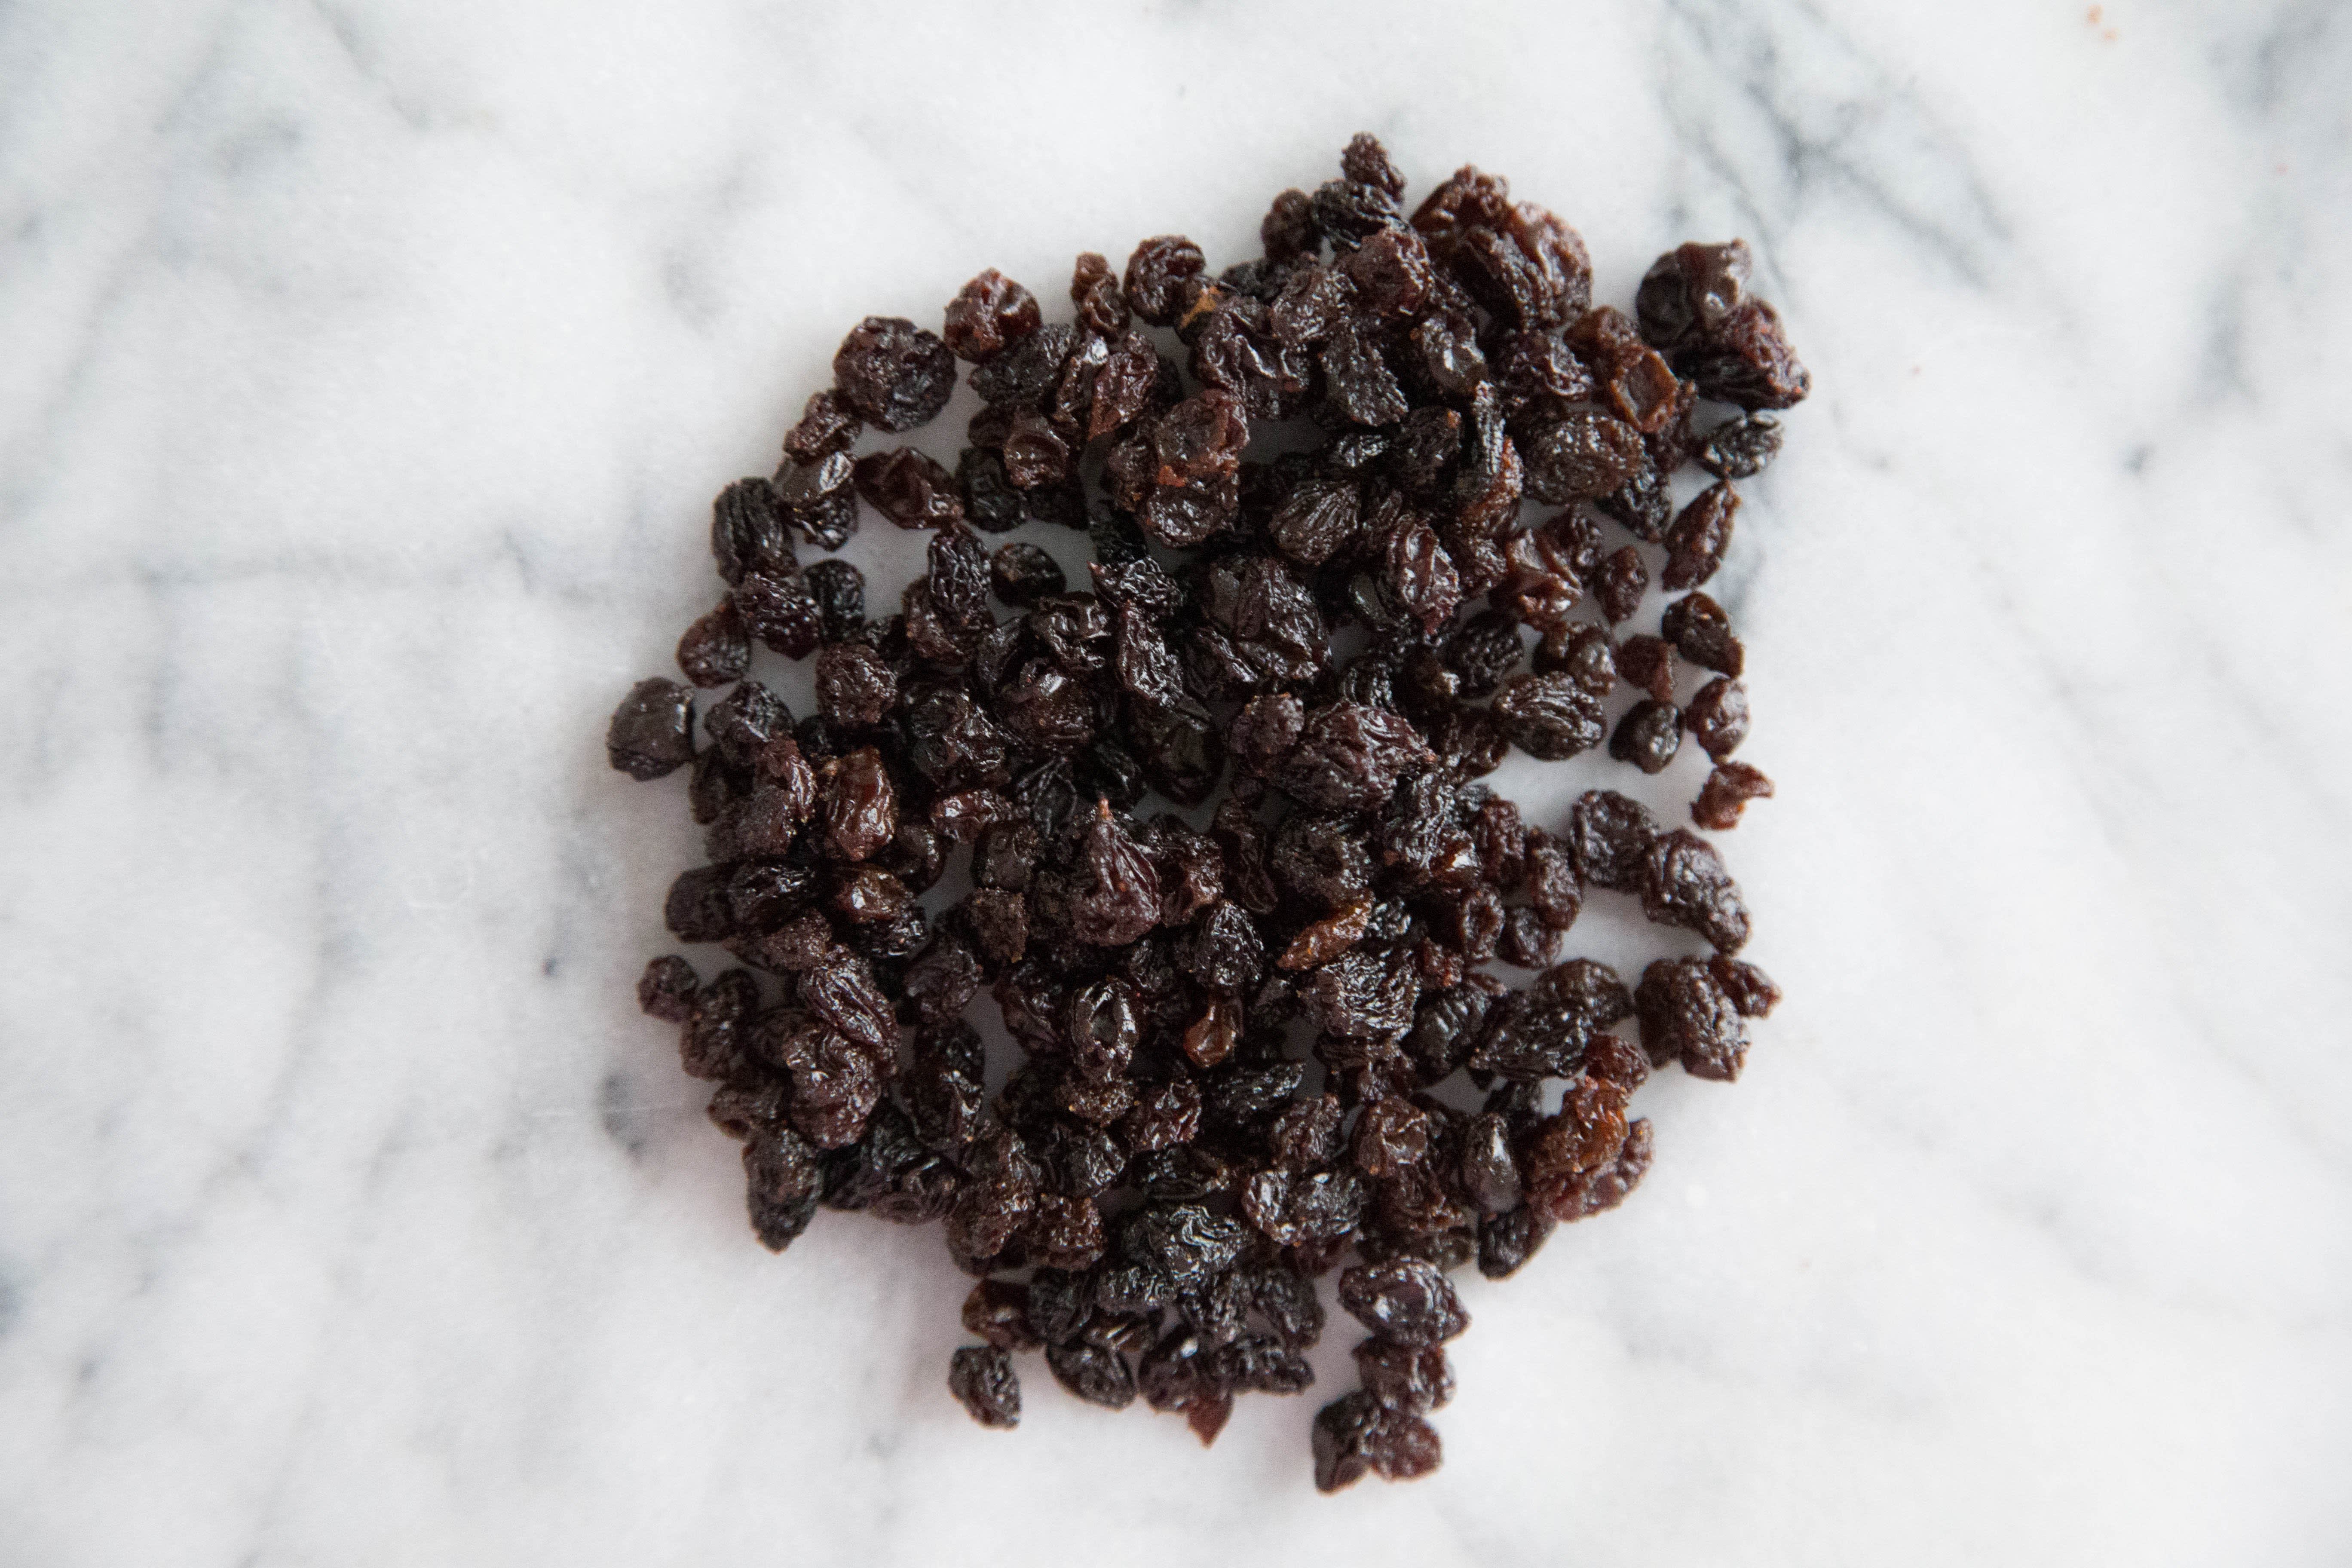 Raisins vs Sultanas vs Currants: What's The Difference?